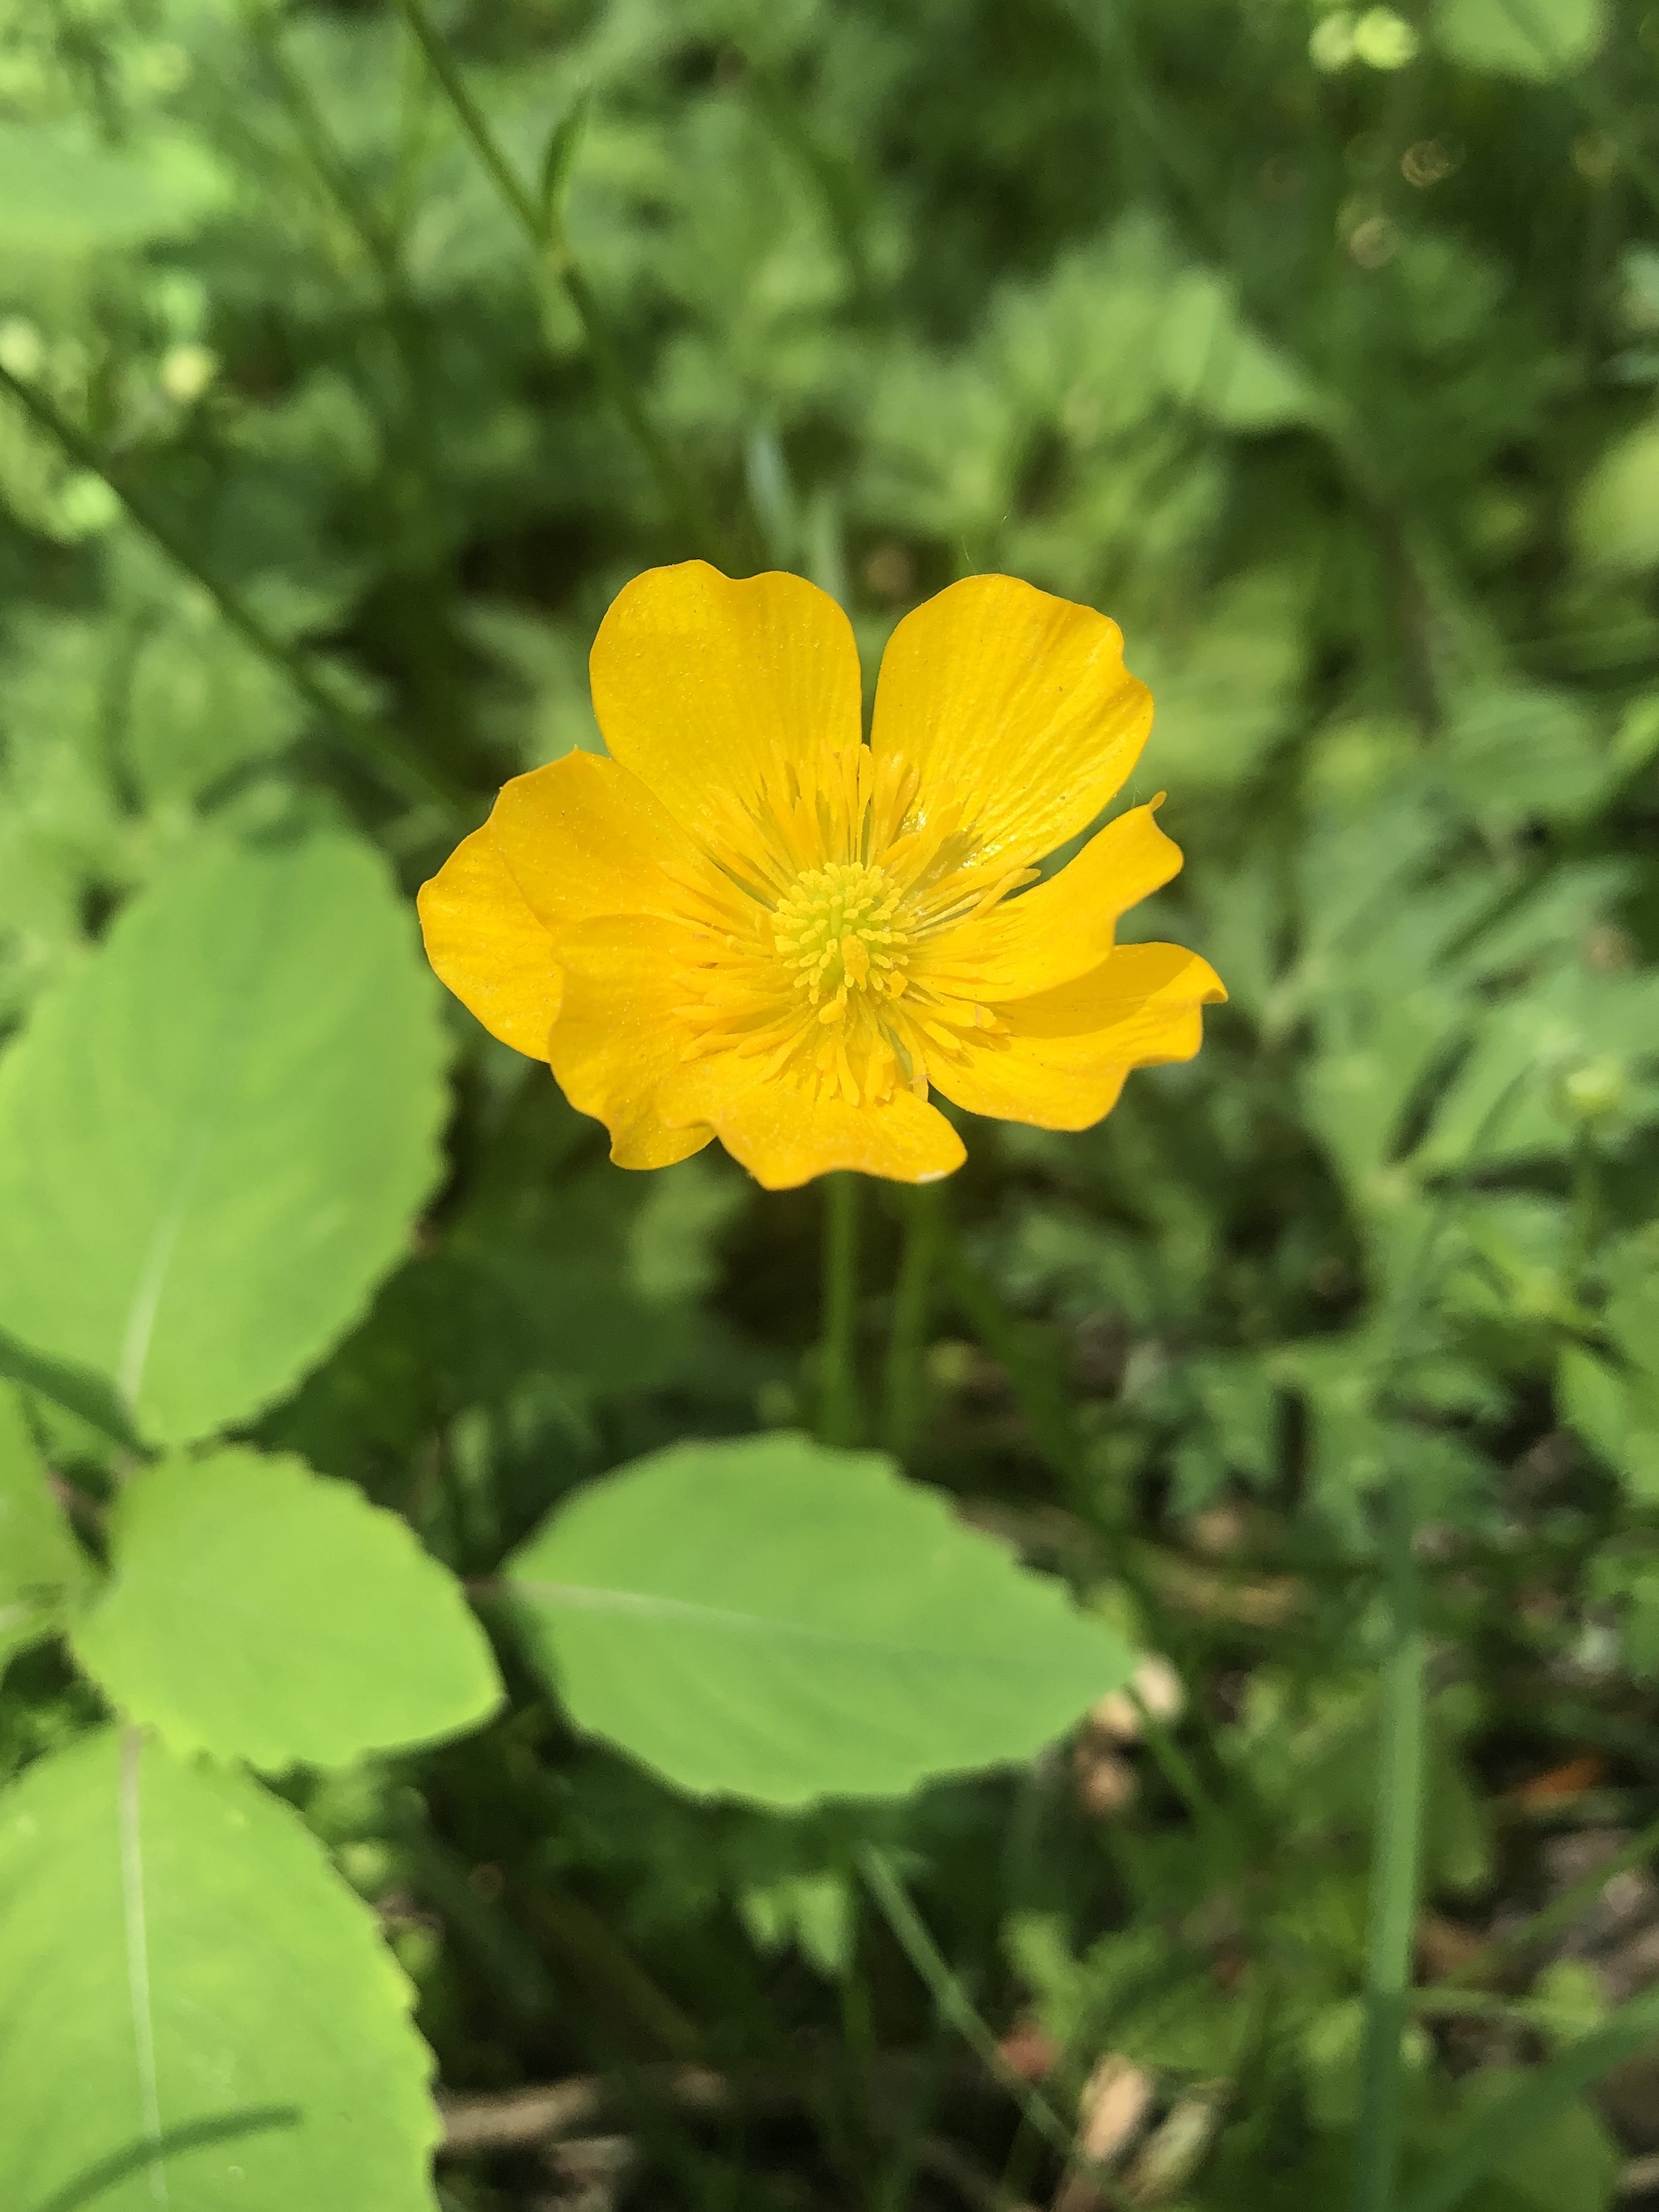 Creeping Buttercup along the bike path behind Gregory Street between Commonwealth and Glenway in Madison, Wisconsin on June 2, 2022.